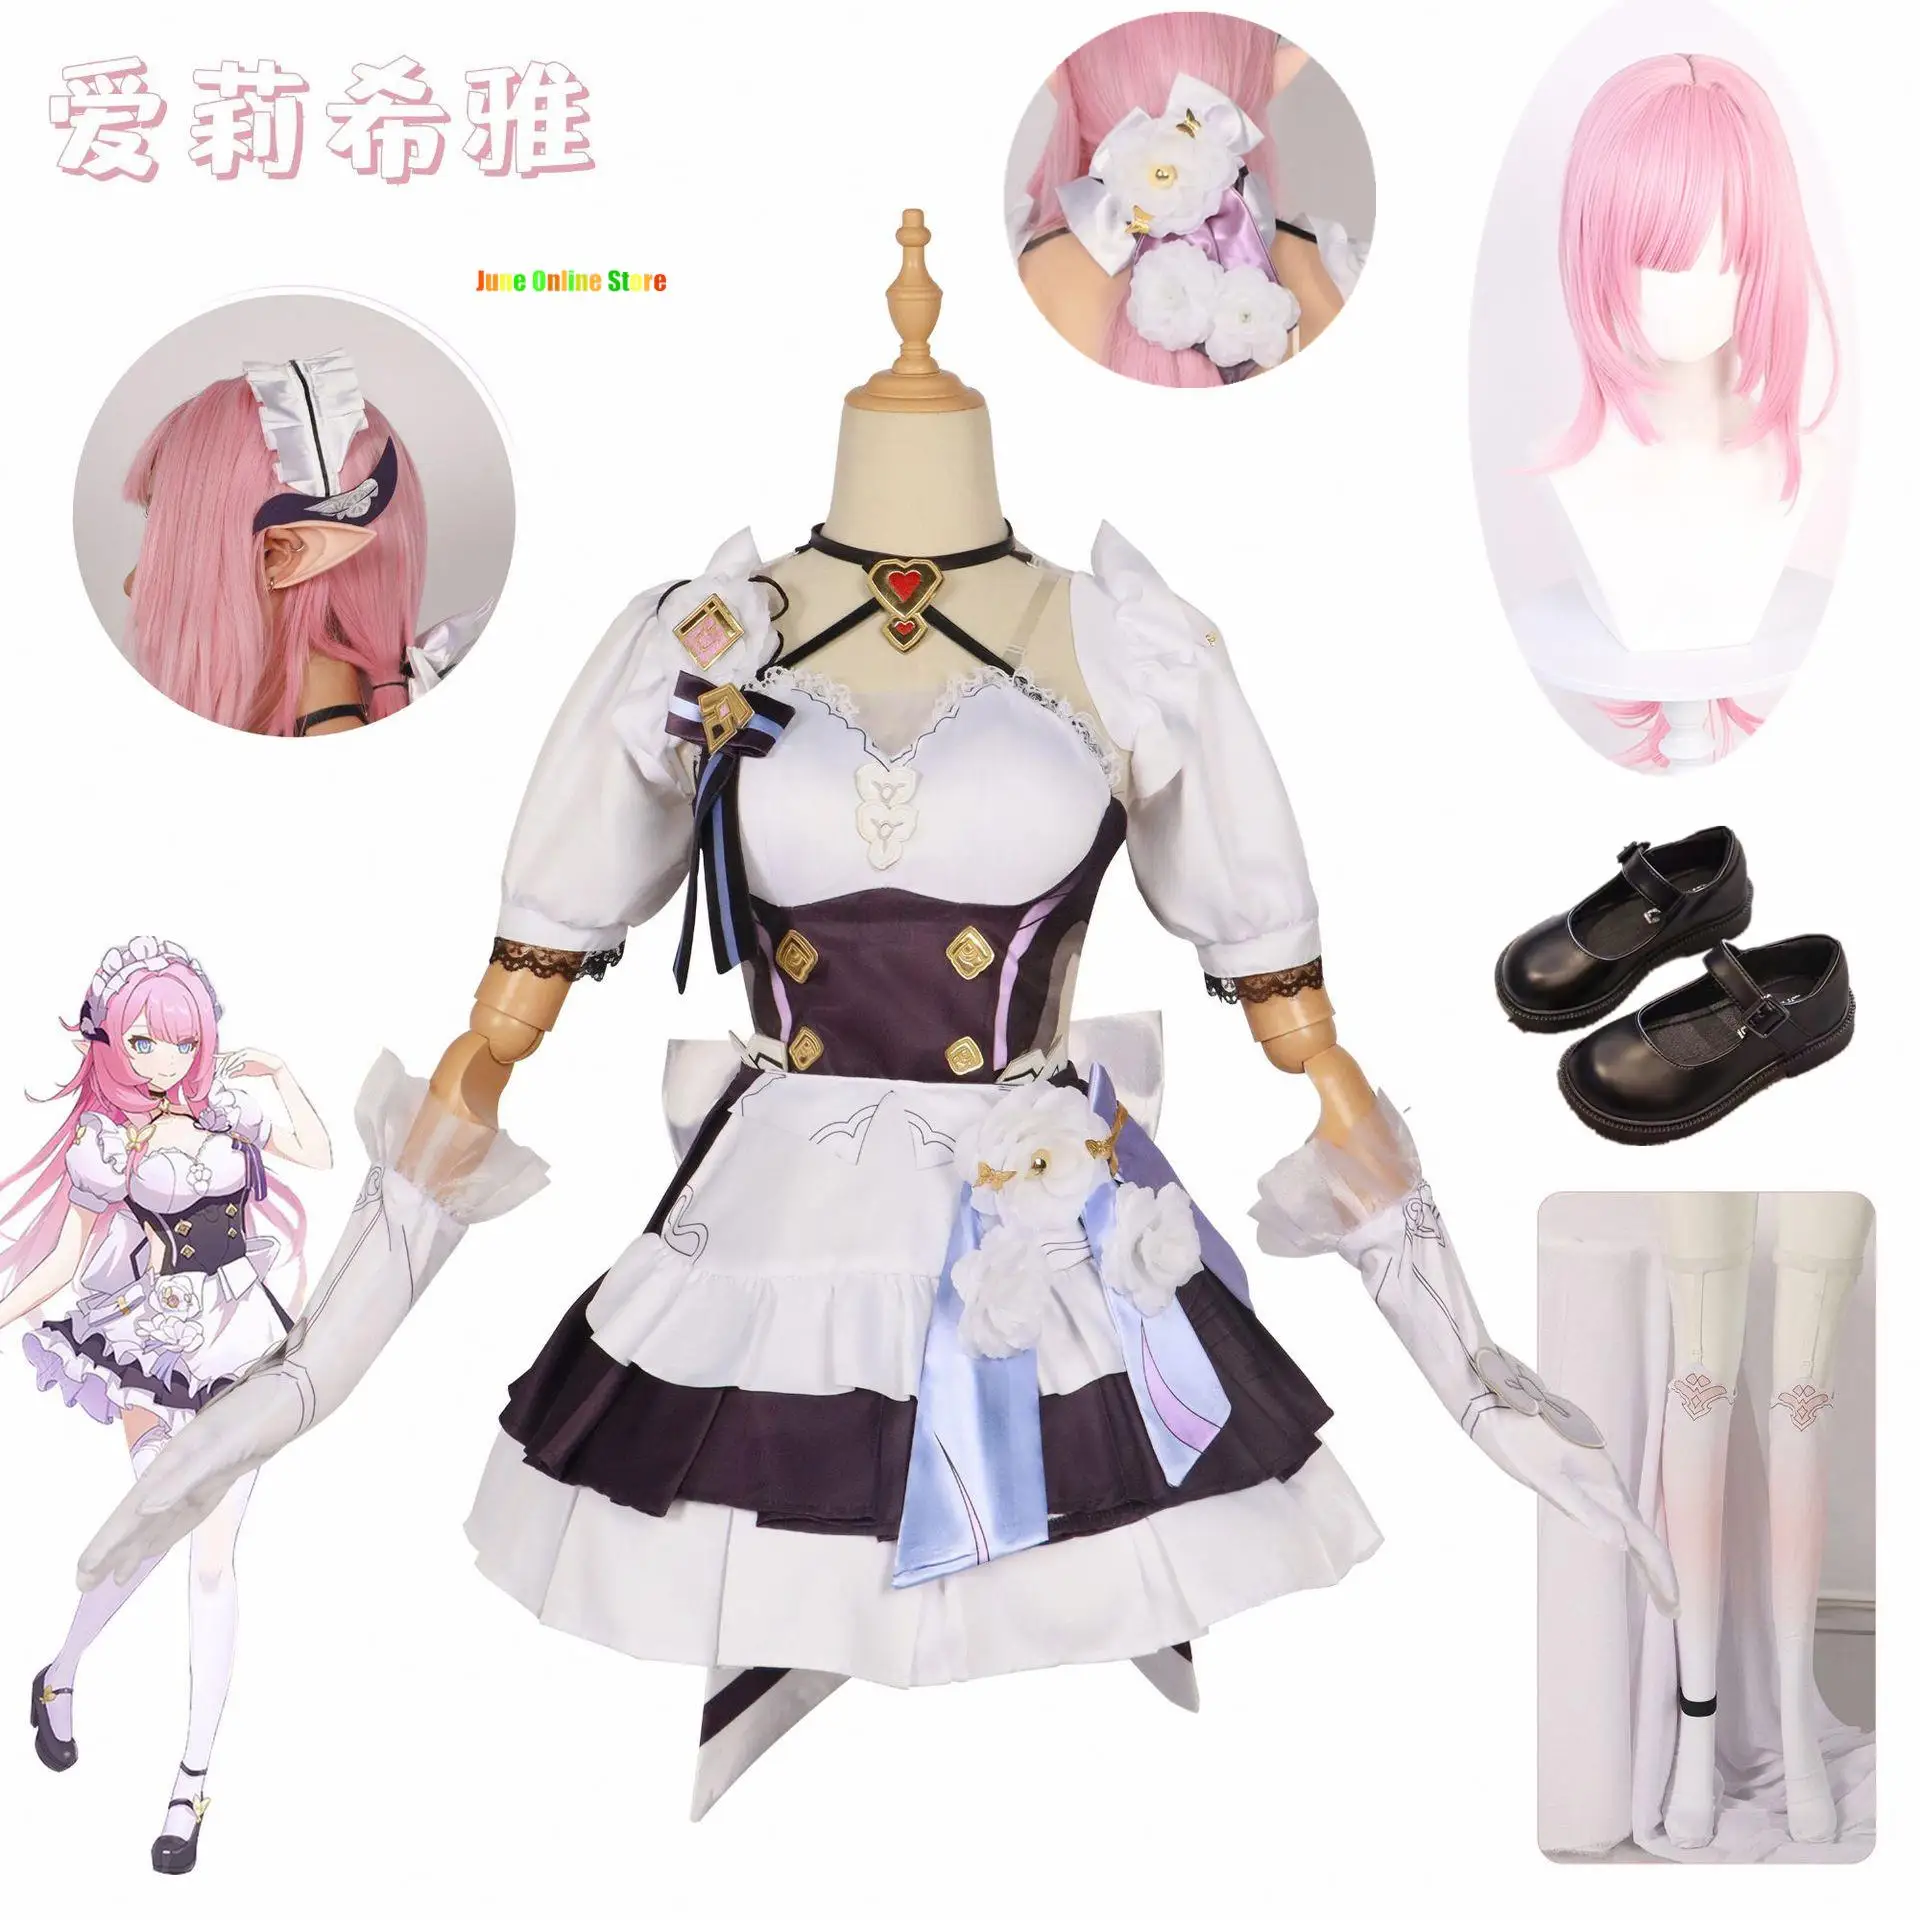 

Game Honkai Impact 3rd: Elysia Maid Costume Miss Pink Elf Dress Cosplay Costume Dress Female Activity Party Role Playing New